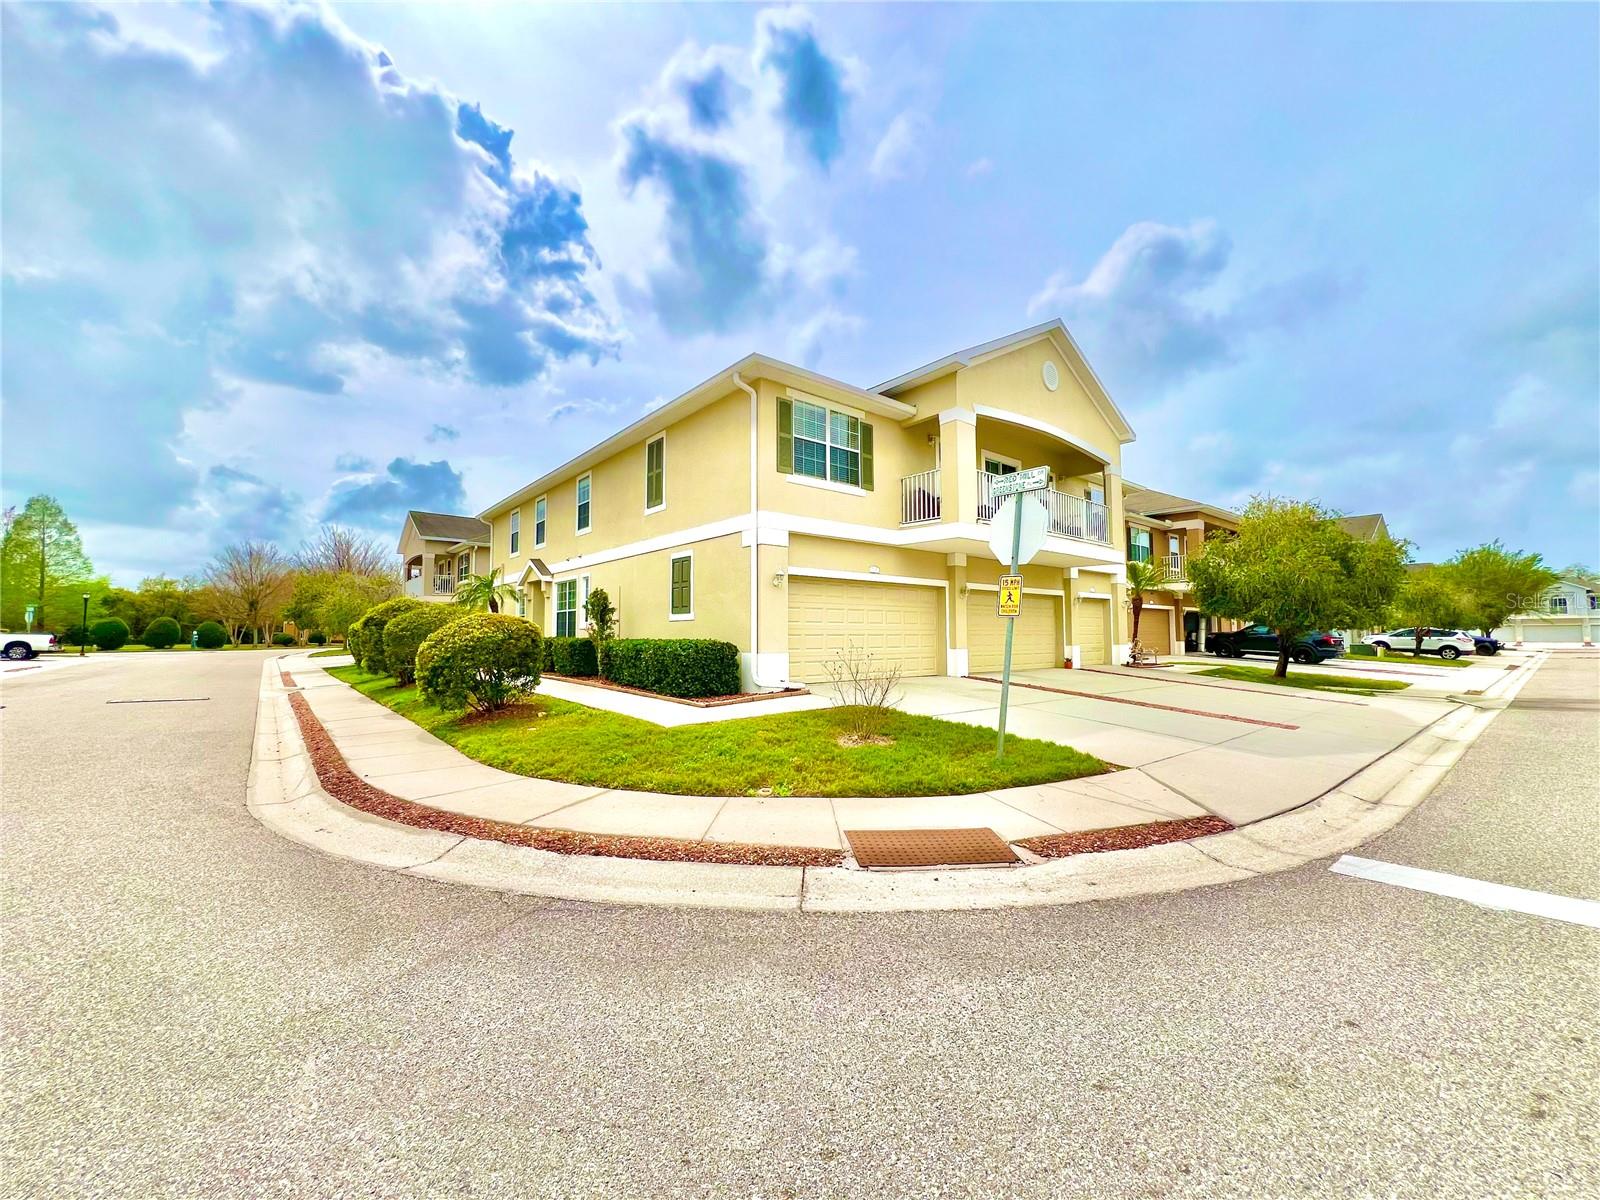 View NEW PORT RICHEY, FL 34653 townhome